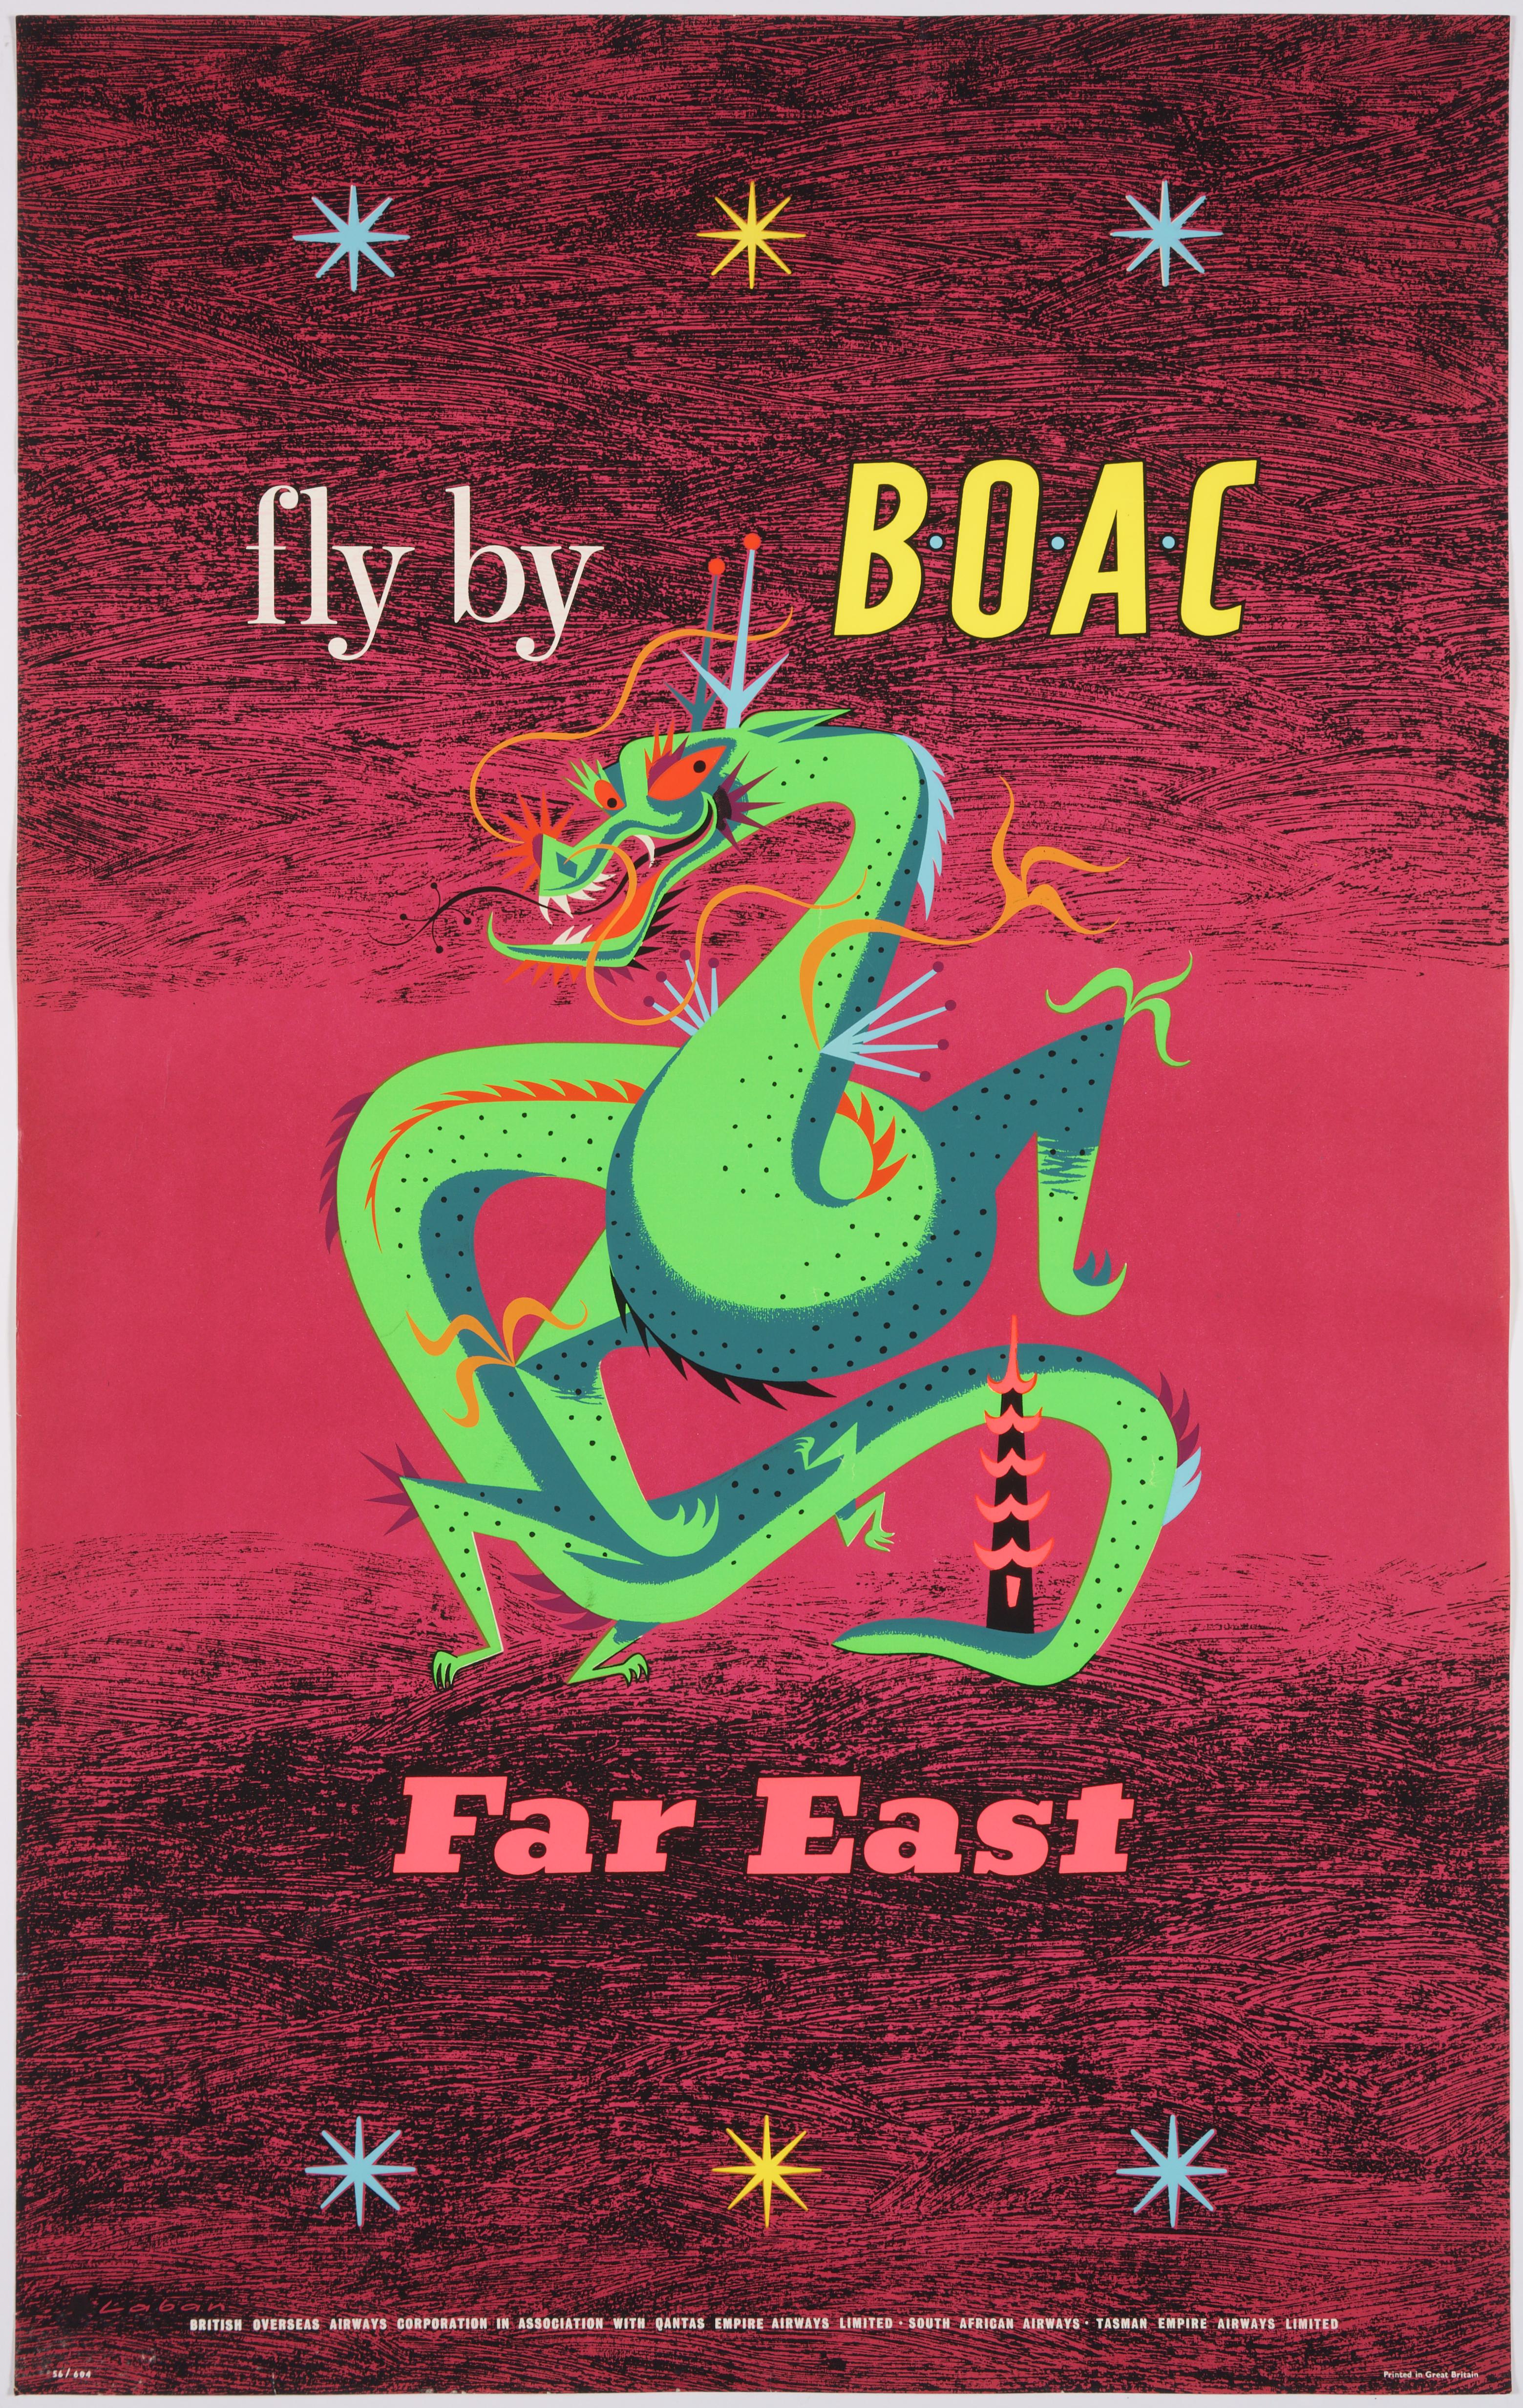 Maurice Laban Figurative Print - Original Vintage British Airline Poster – Fly by BOAC to the Far East